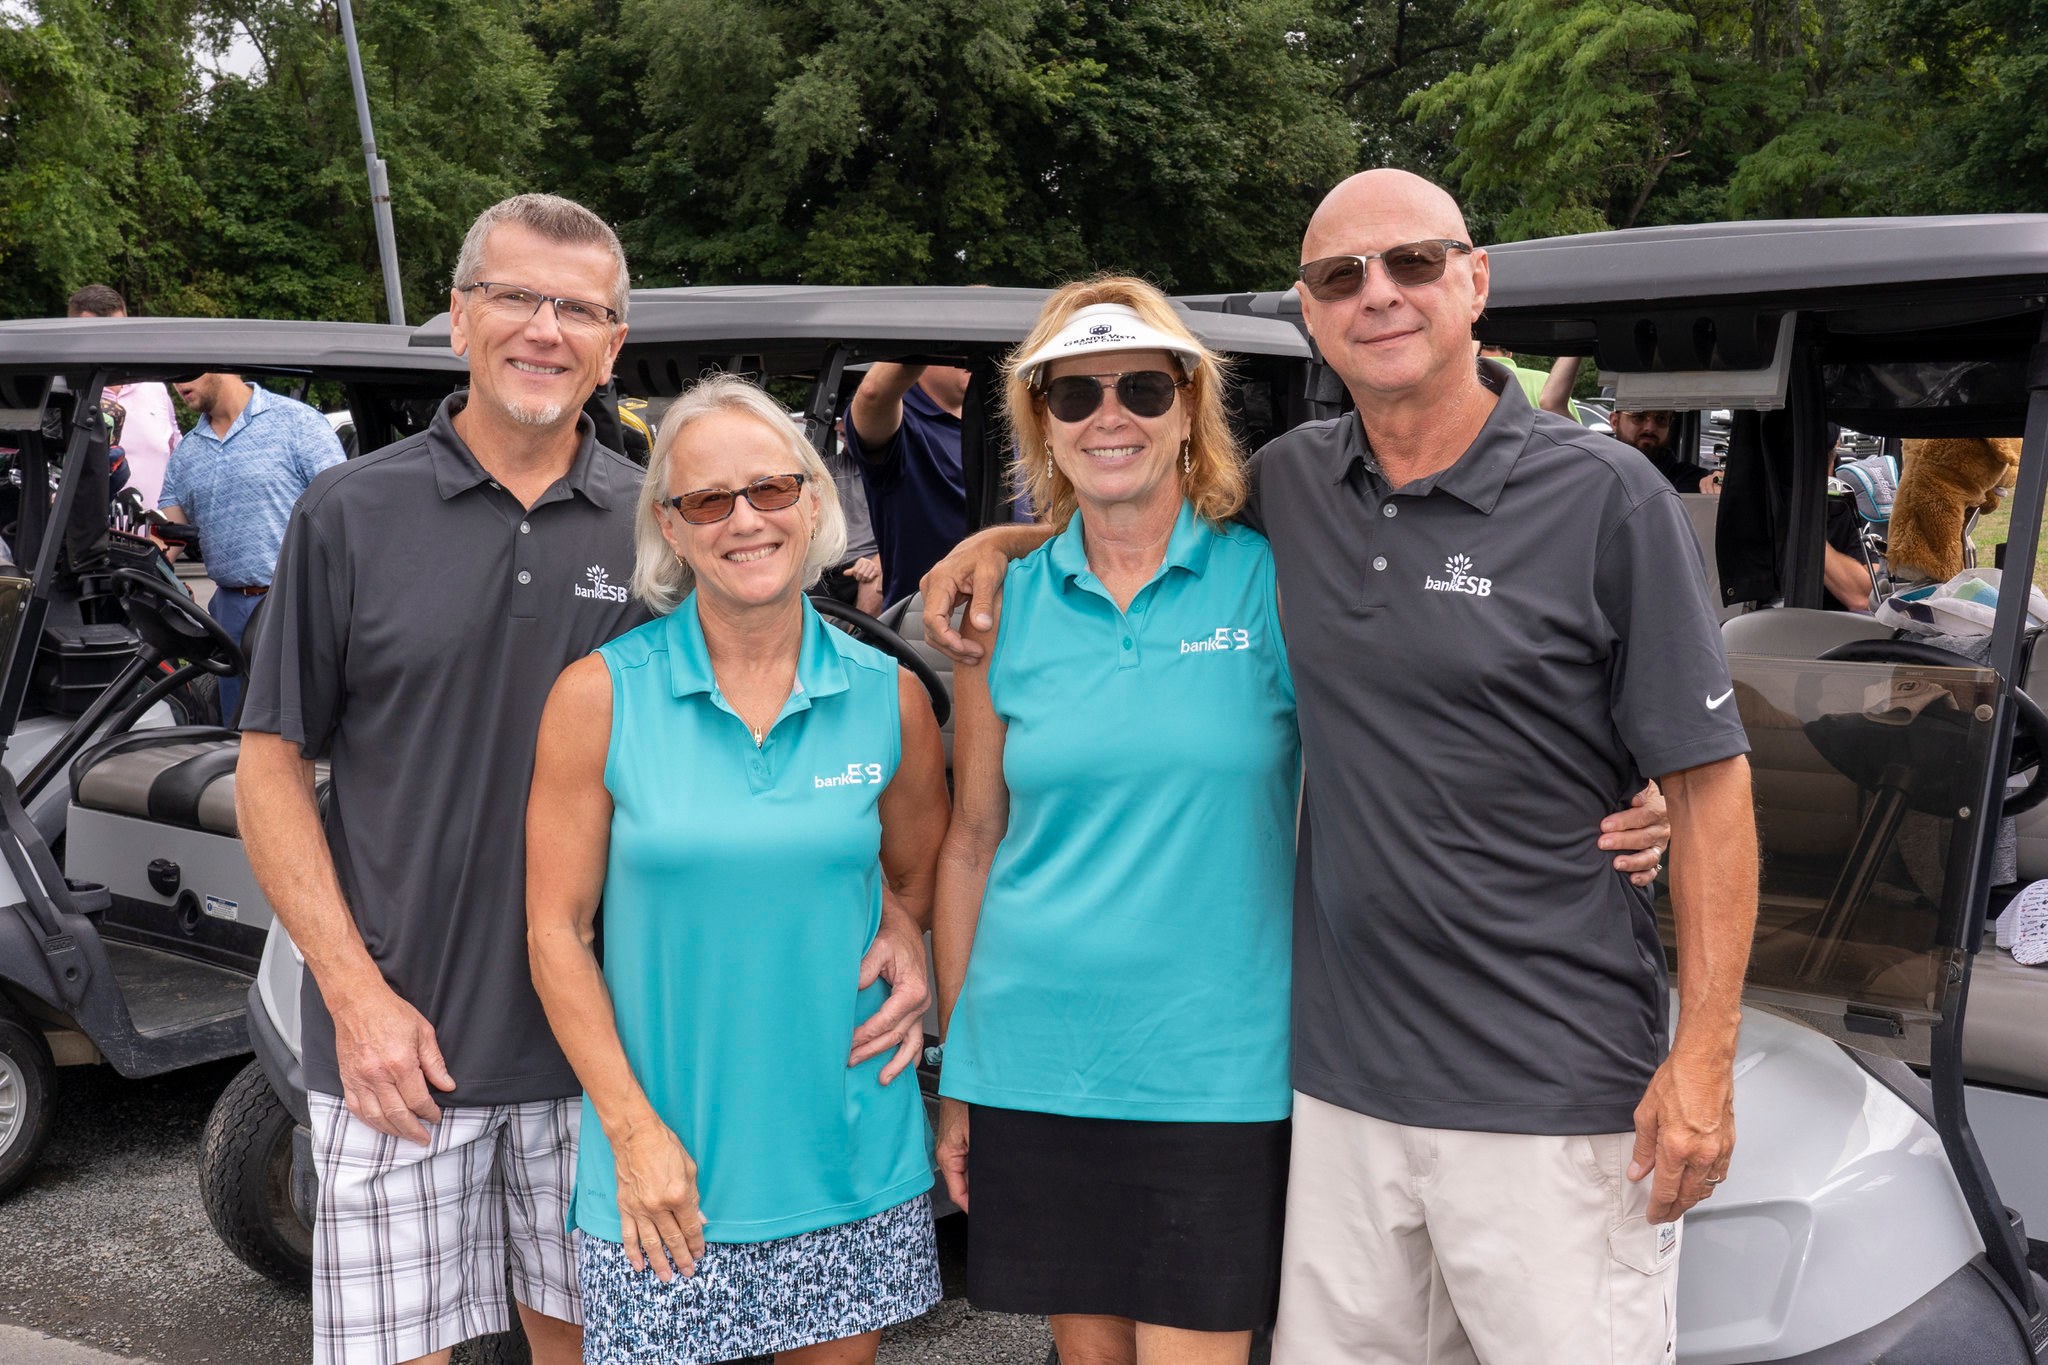 Two women and two men in golf shorts and tees, smiling